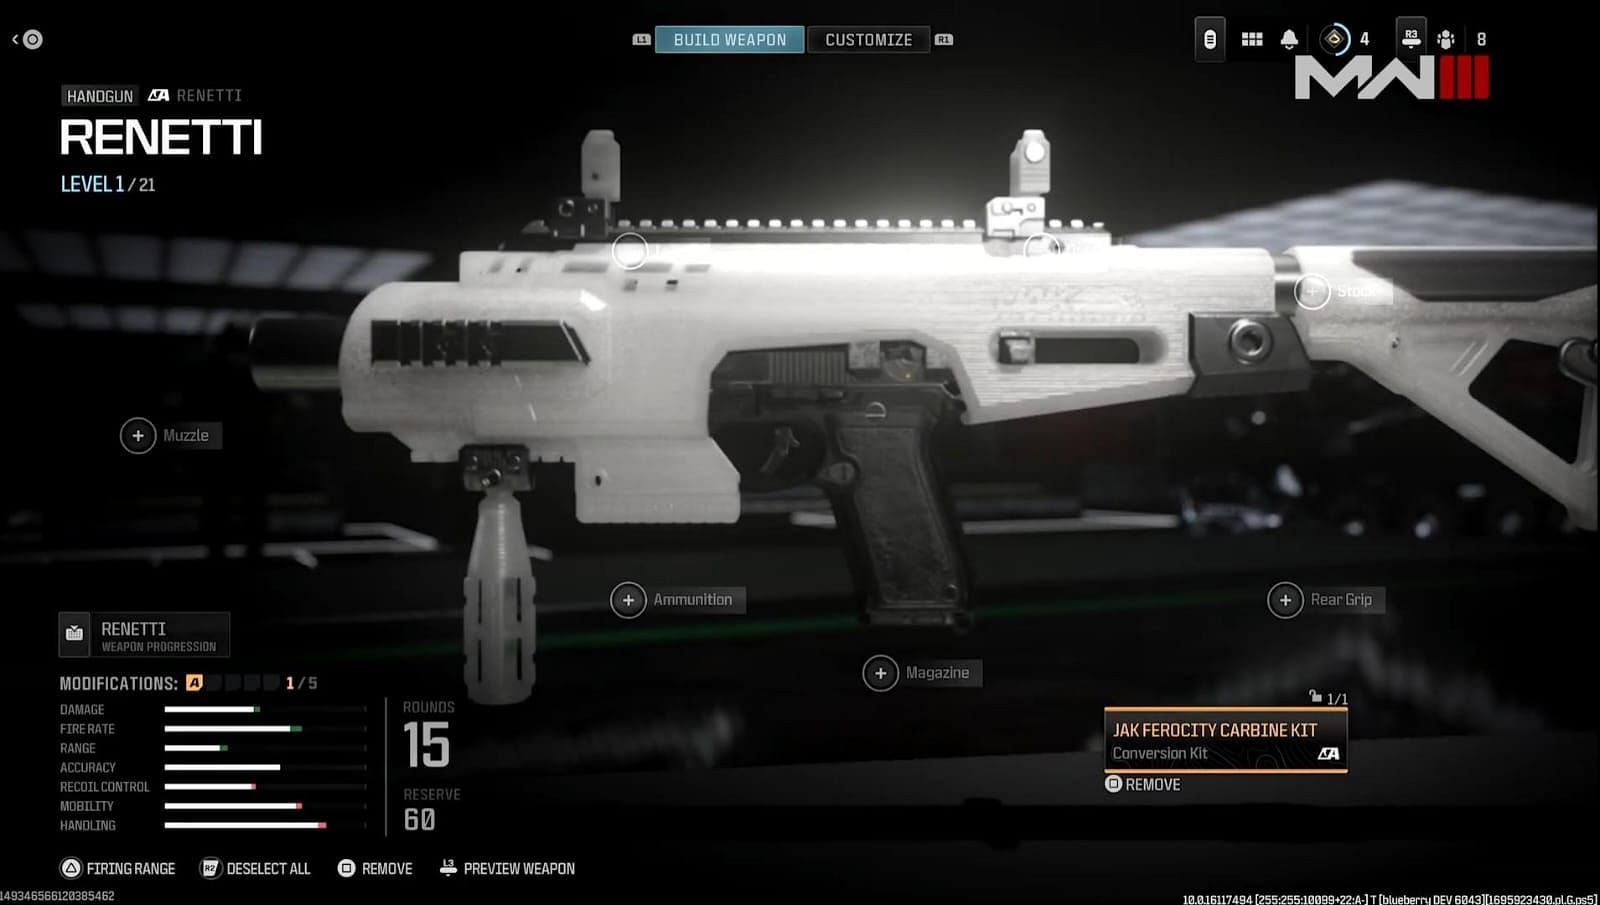 The latest gunsmith system seems quite viable (Image via YouTube/Call of Duty)